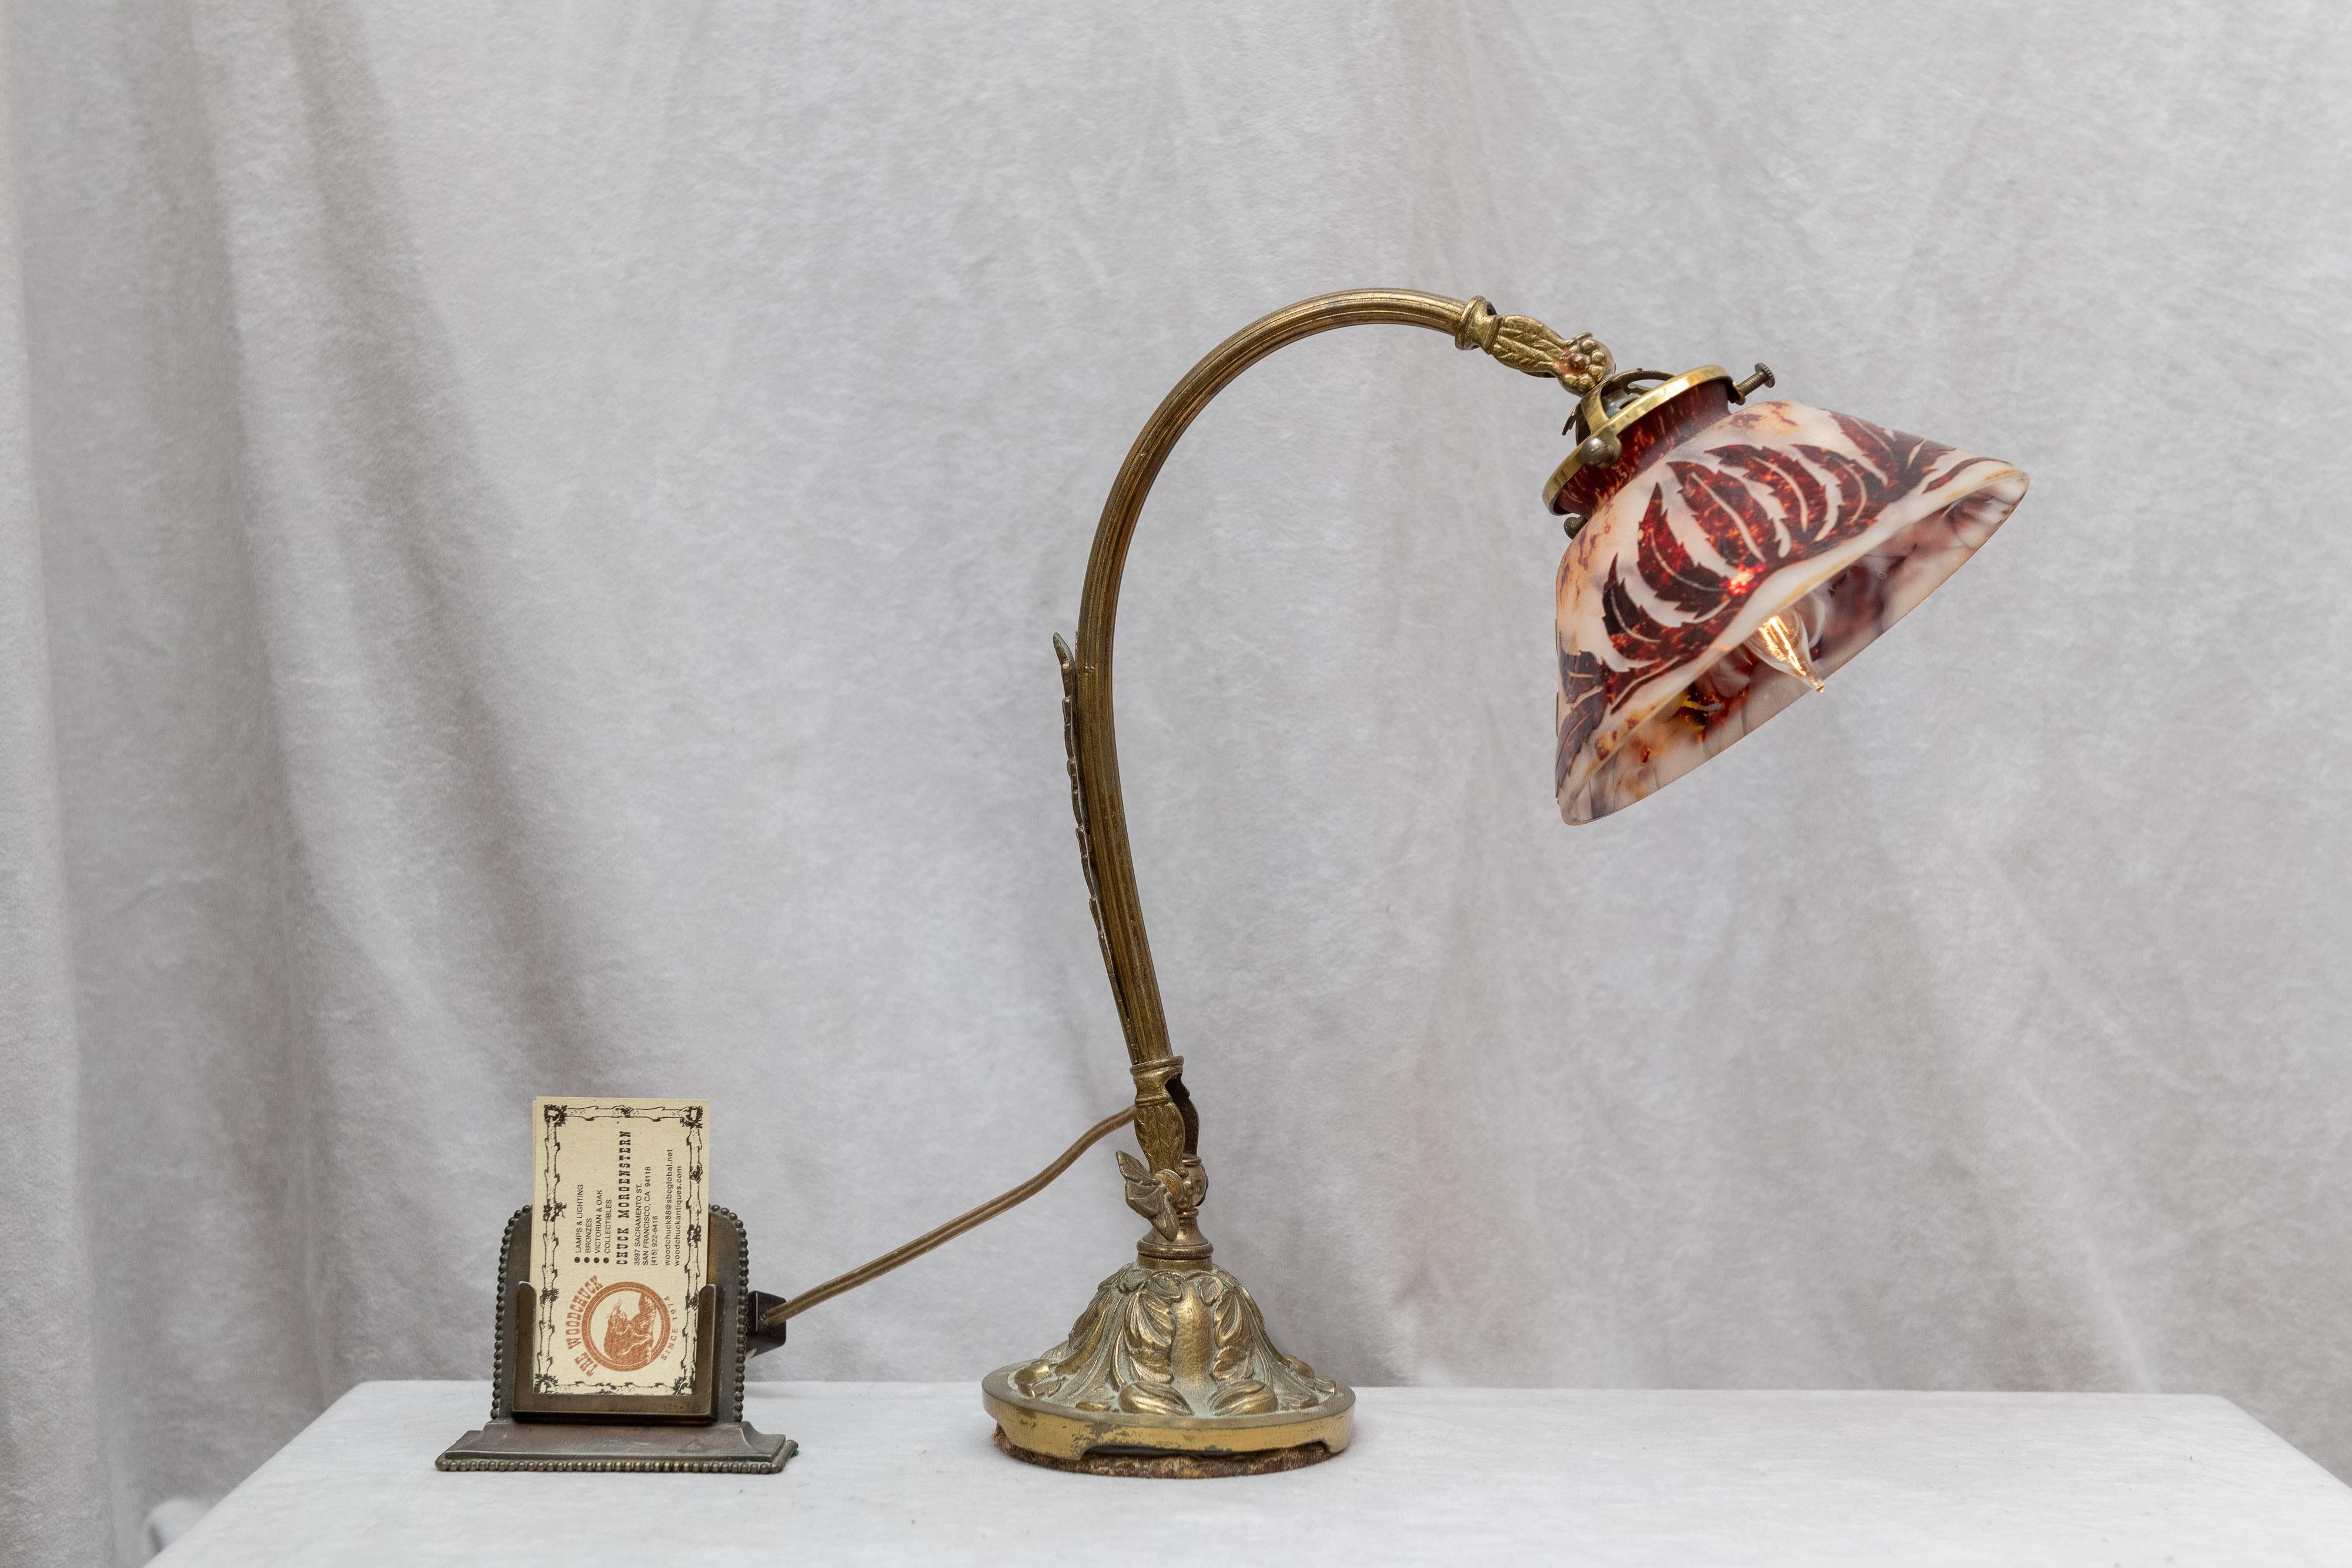 This sweet little desk lamp has the great Art Nouveau look. The bronze base and colorful cameo glass shade make a fine package. Cameo glass is a very complex and skillful art. 2 layers of glass are joined and then the top layer is carved away to